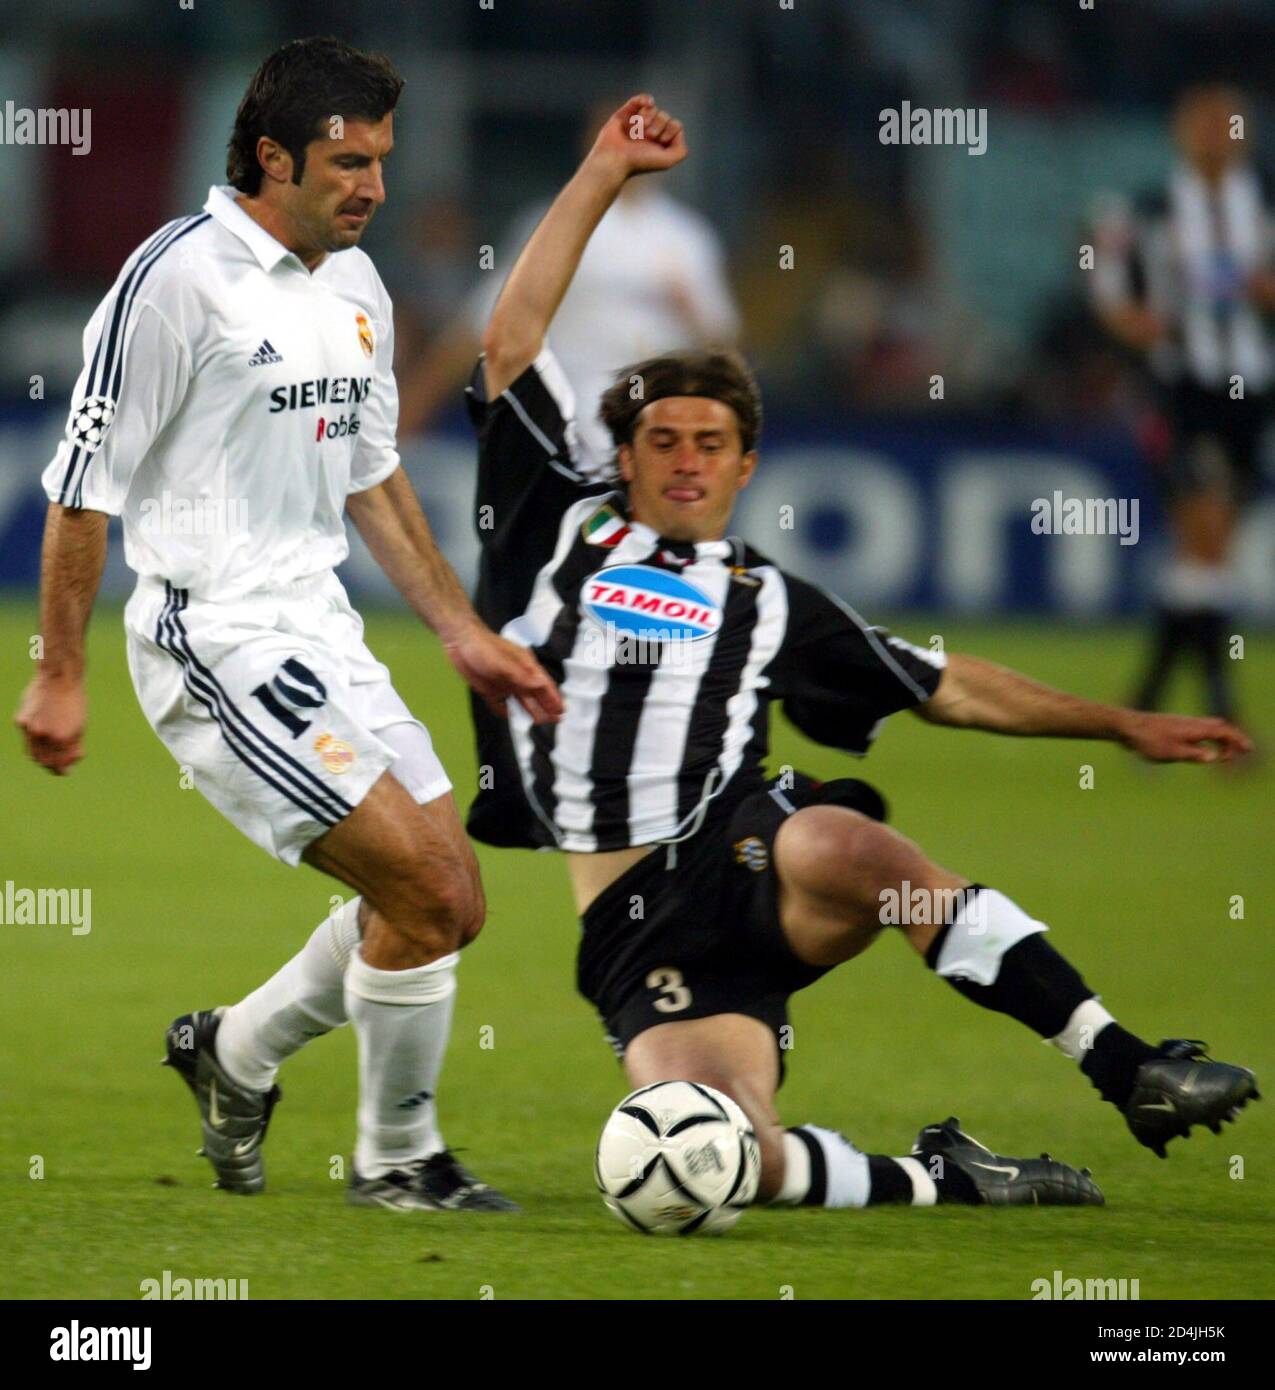 REAL MADRID'S LUIS FIGO FIGHTS FOR THE BALL WITH JUVENTUS' ALESSIO  TACCHINARDI DURING THE CHAMPIONS LEAGUE SEMI-FINAL SECOND LEG MATCH AT THE  DELLE ALPI IN TURIN Stock Photo - Alamy